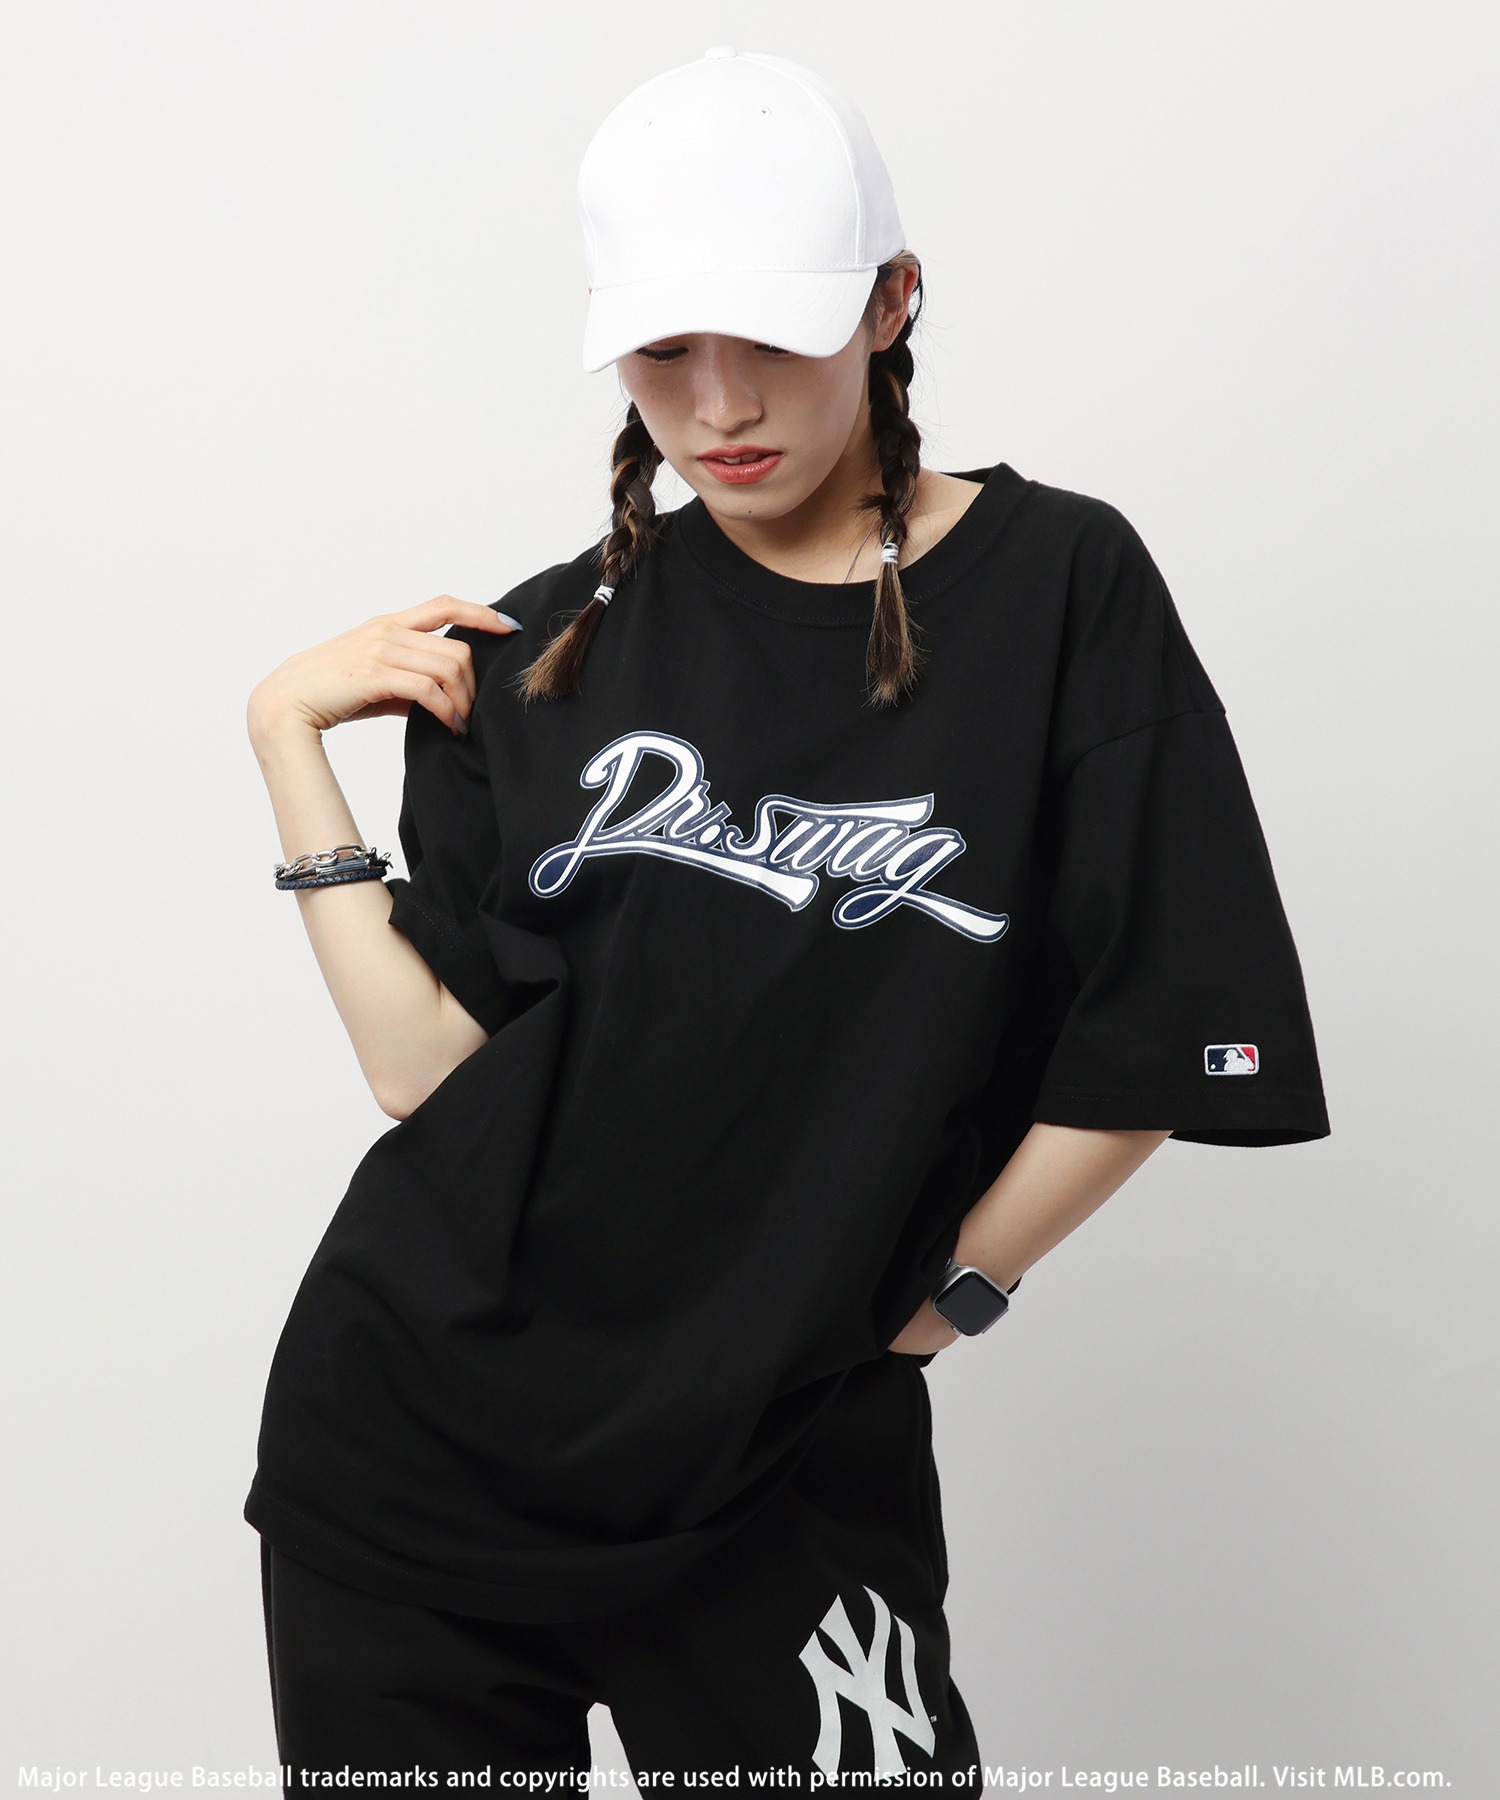 MLB】Dr.SWAGコラボフロッキープリントTシャツ BACK TO THE FIELD(BTTF